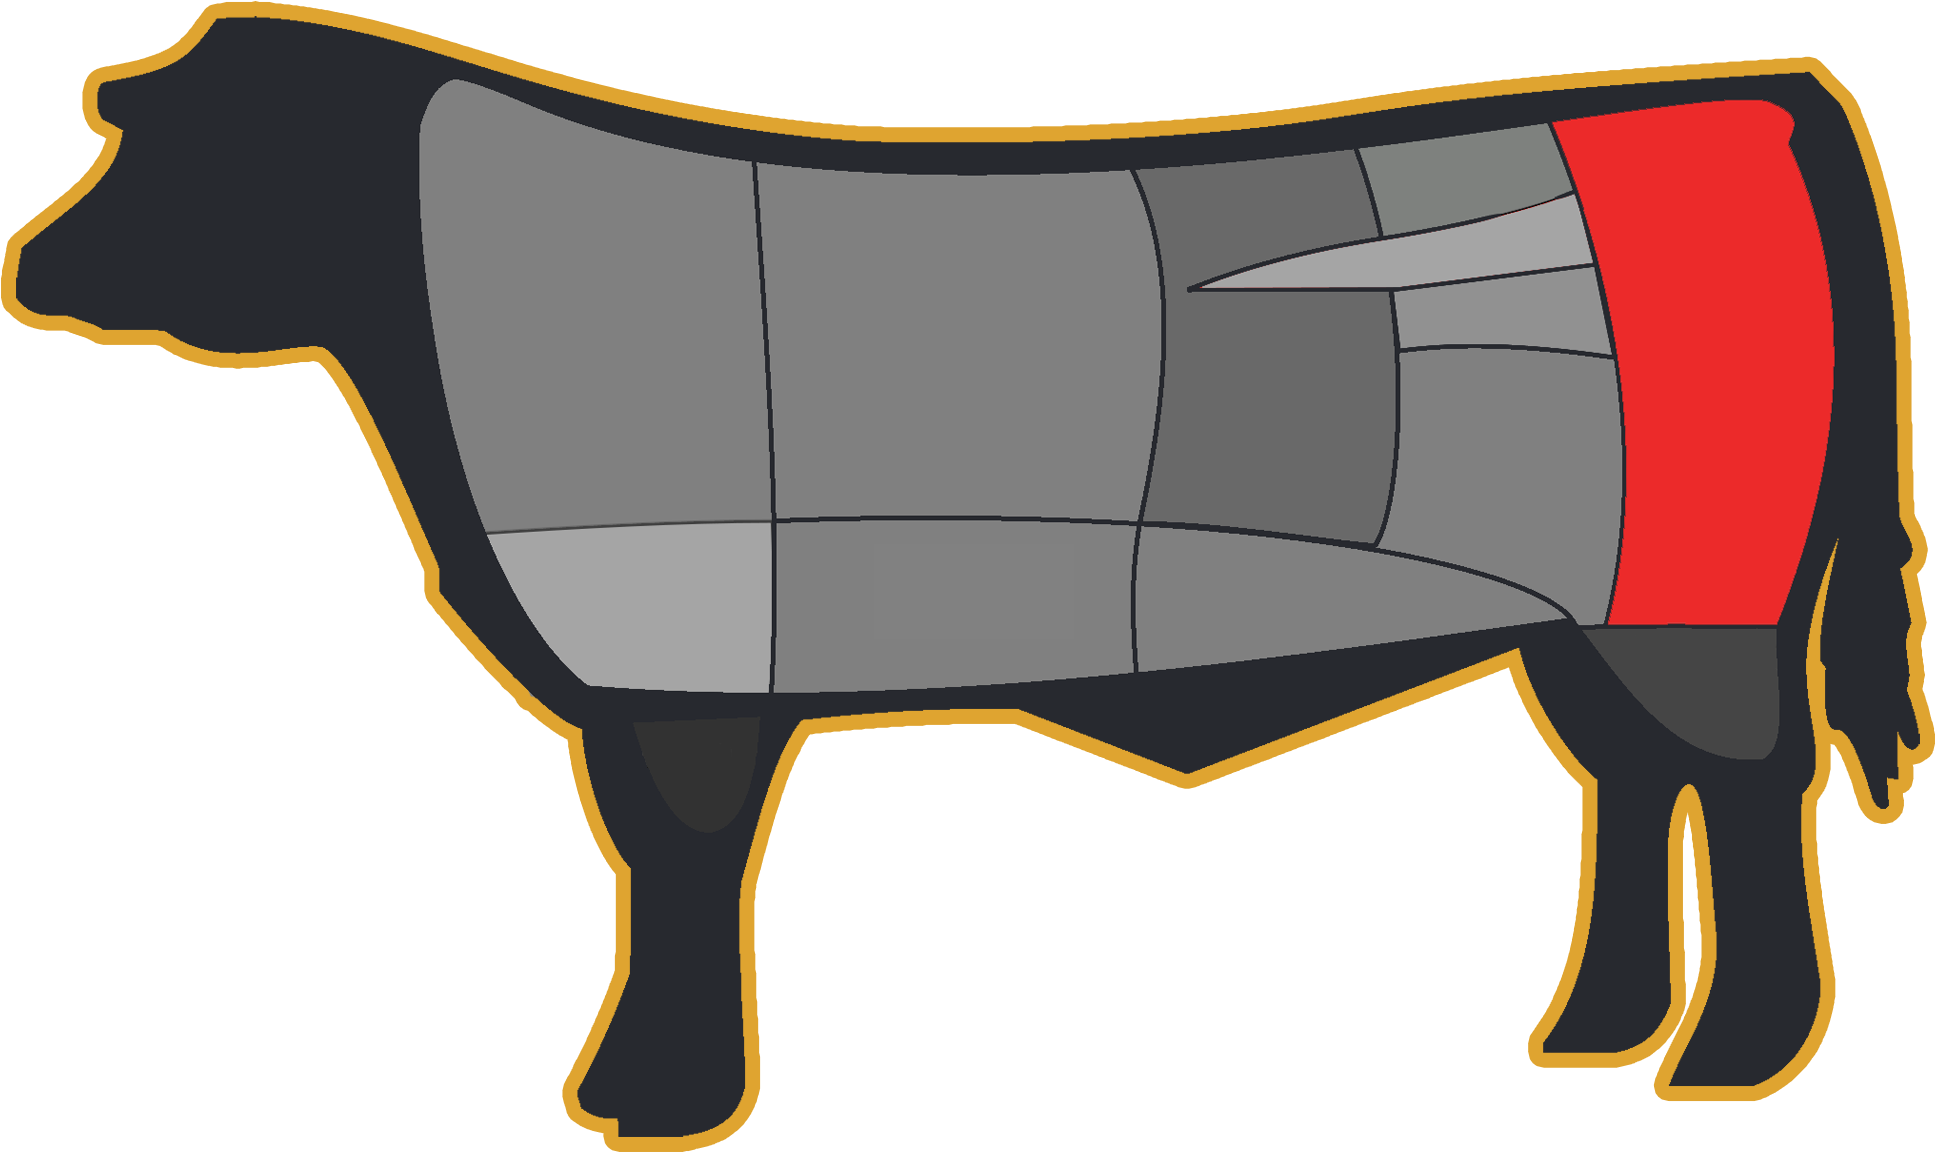 Cooking Concepts - Part Of The Cow Is Eye Fillet (2000x1219)